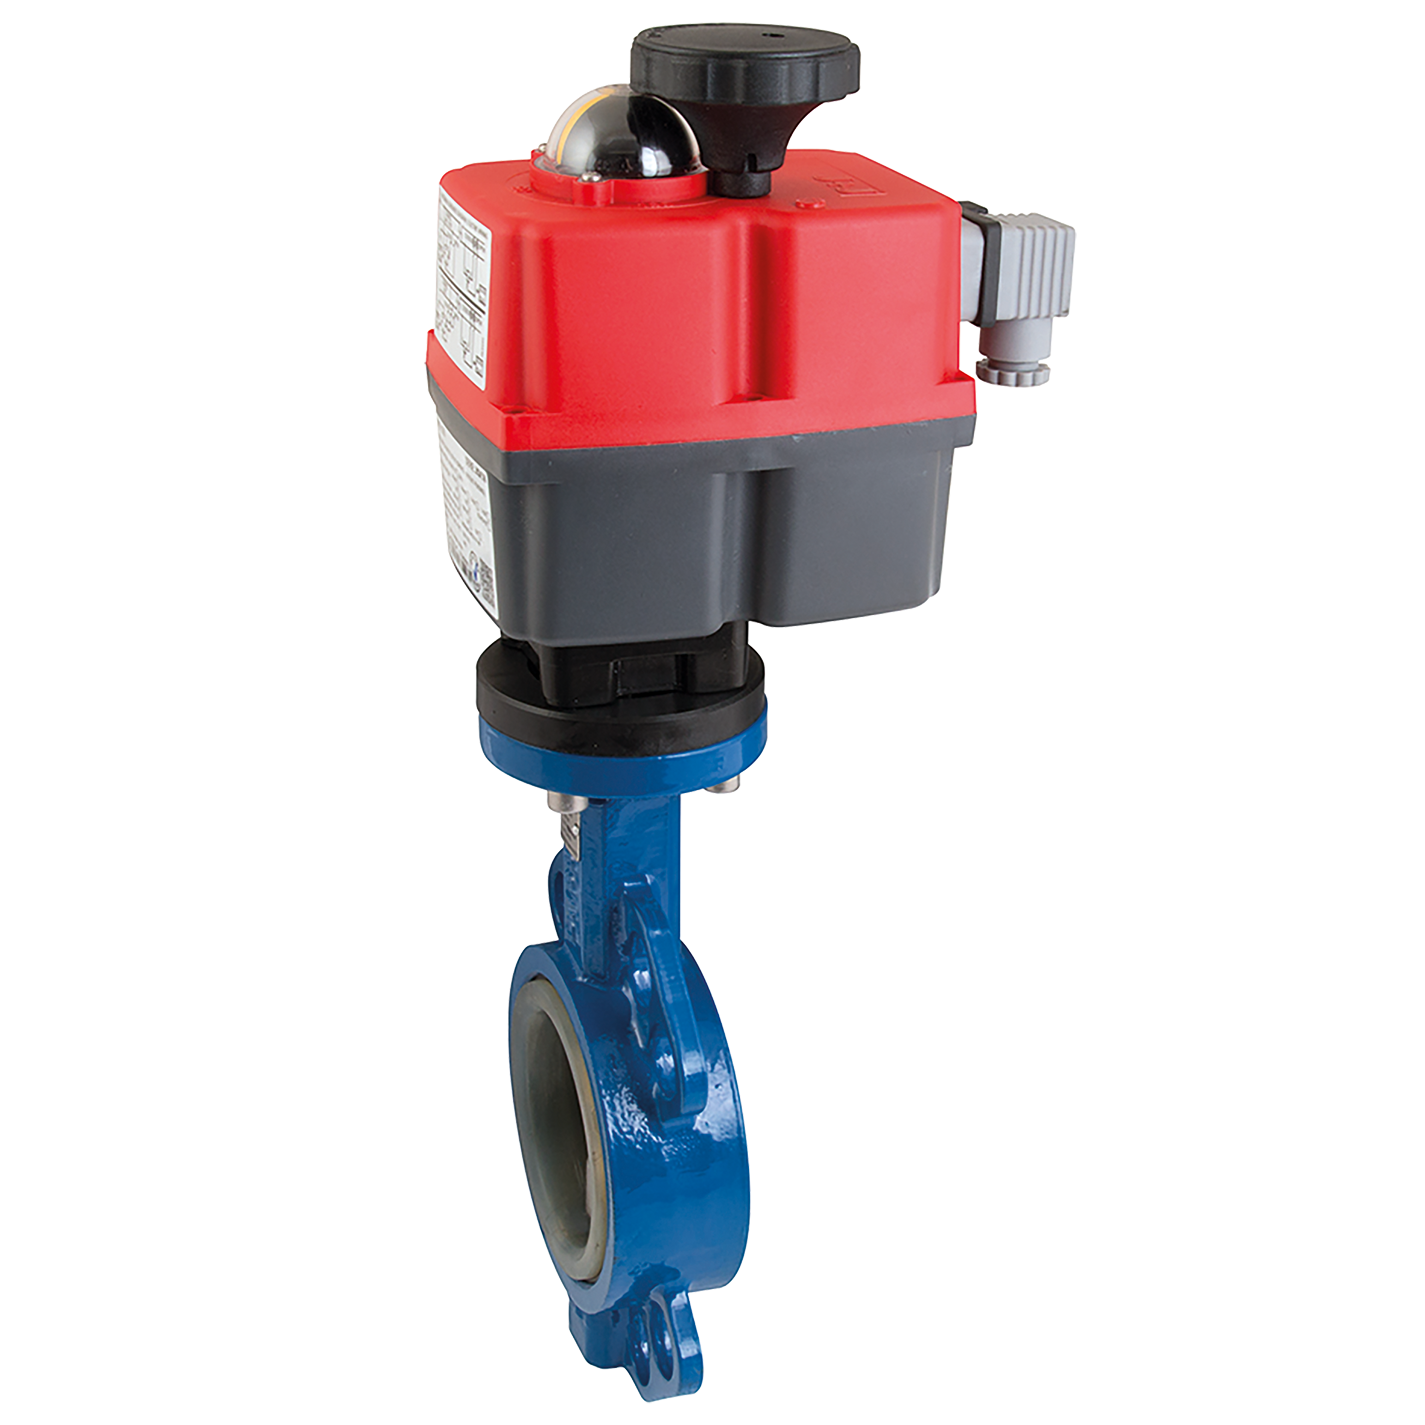 Suppliers of Electric Actuated Butterfly Valve UK